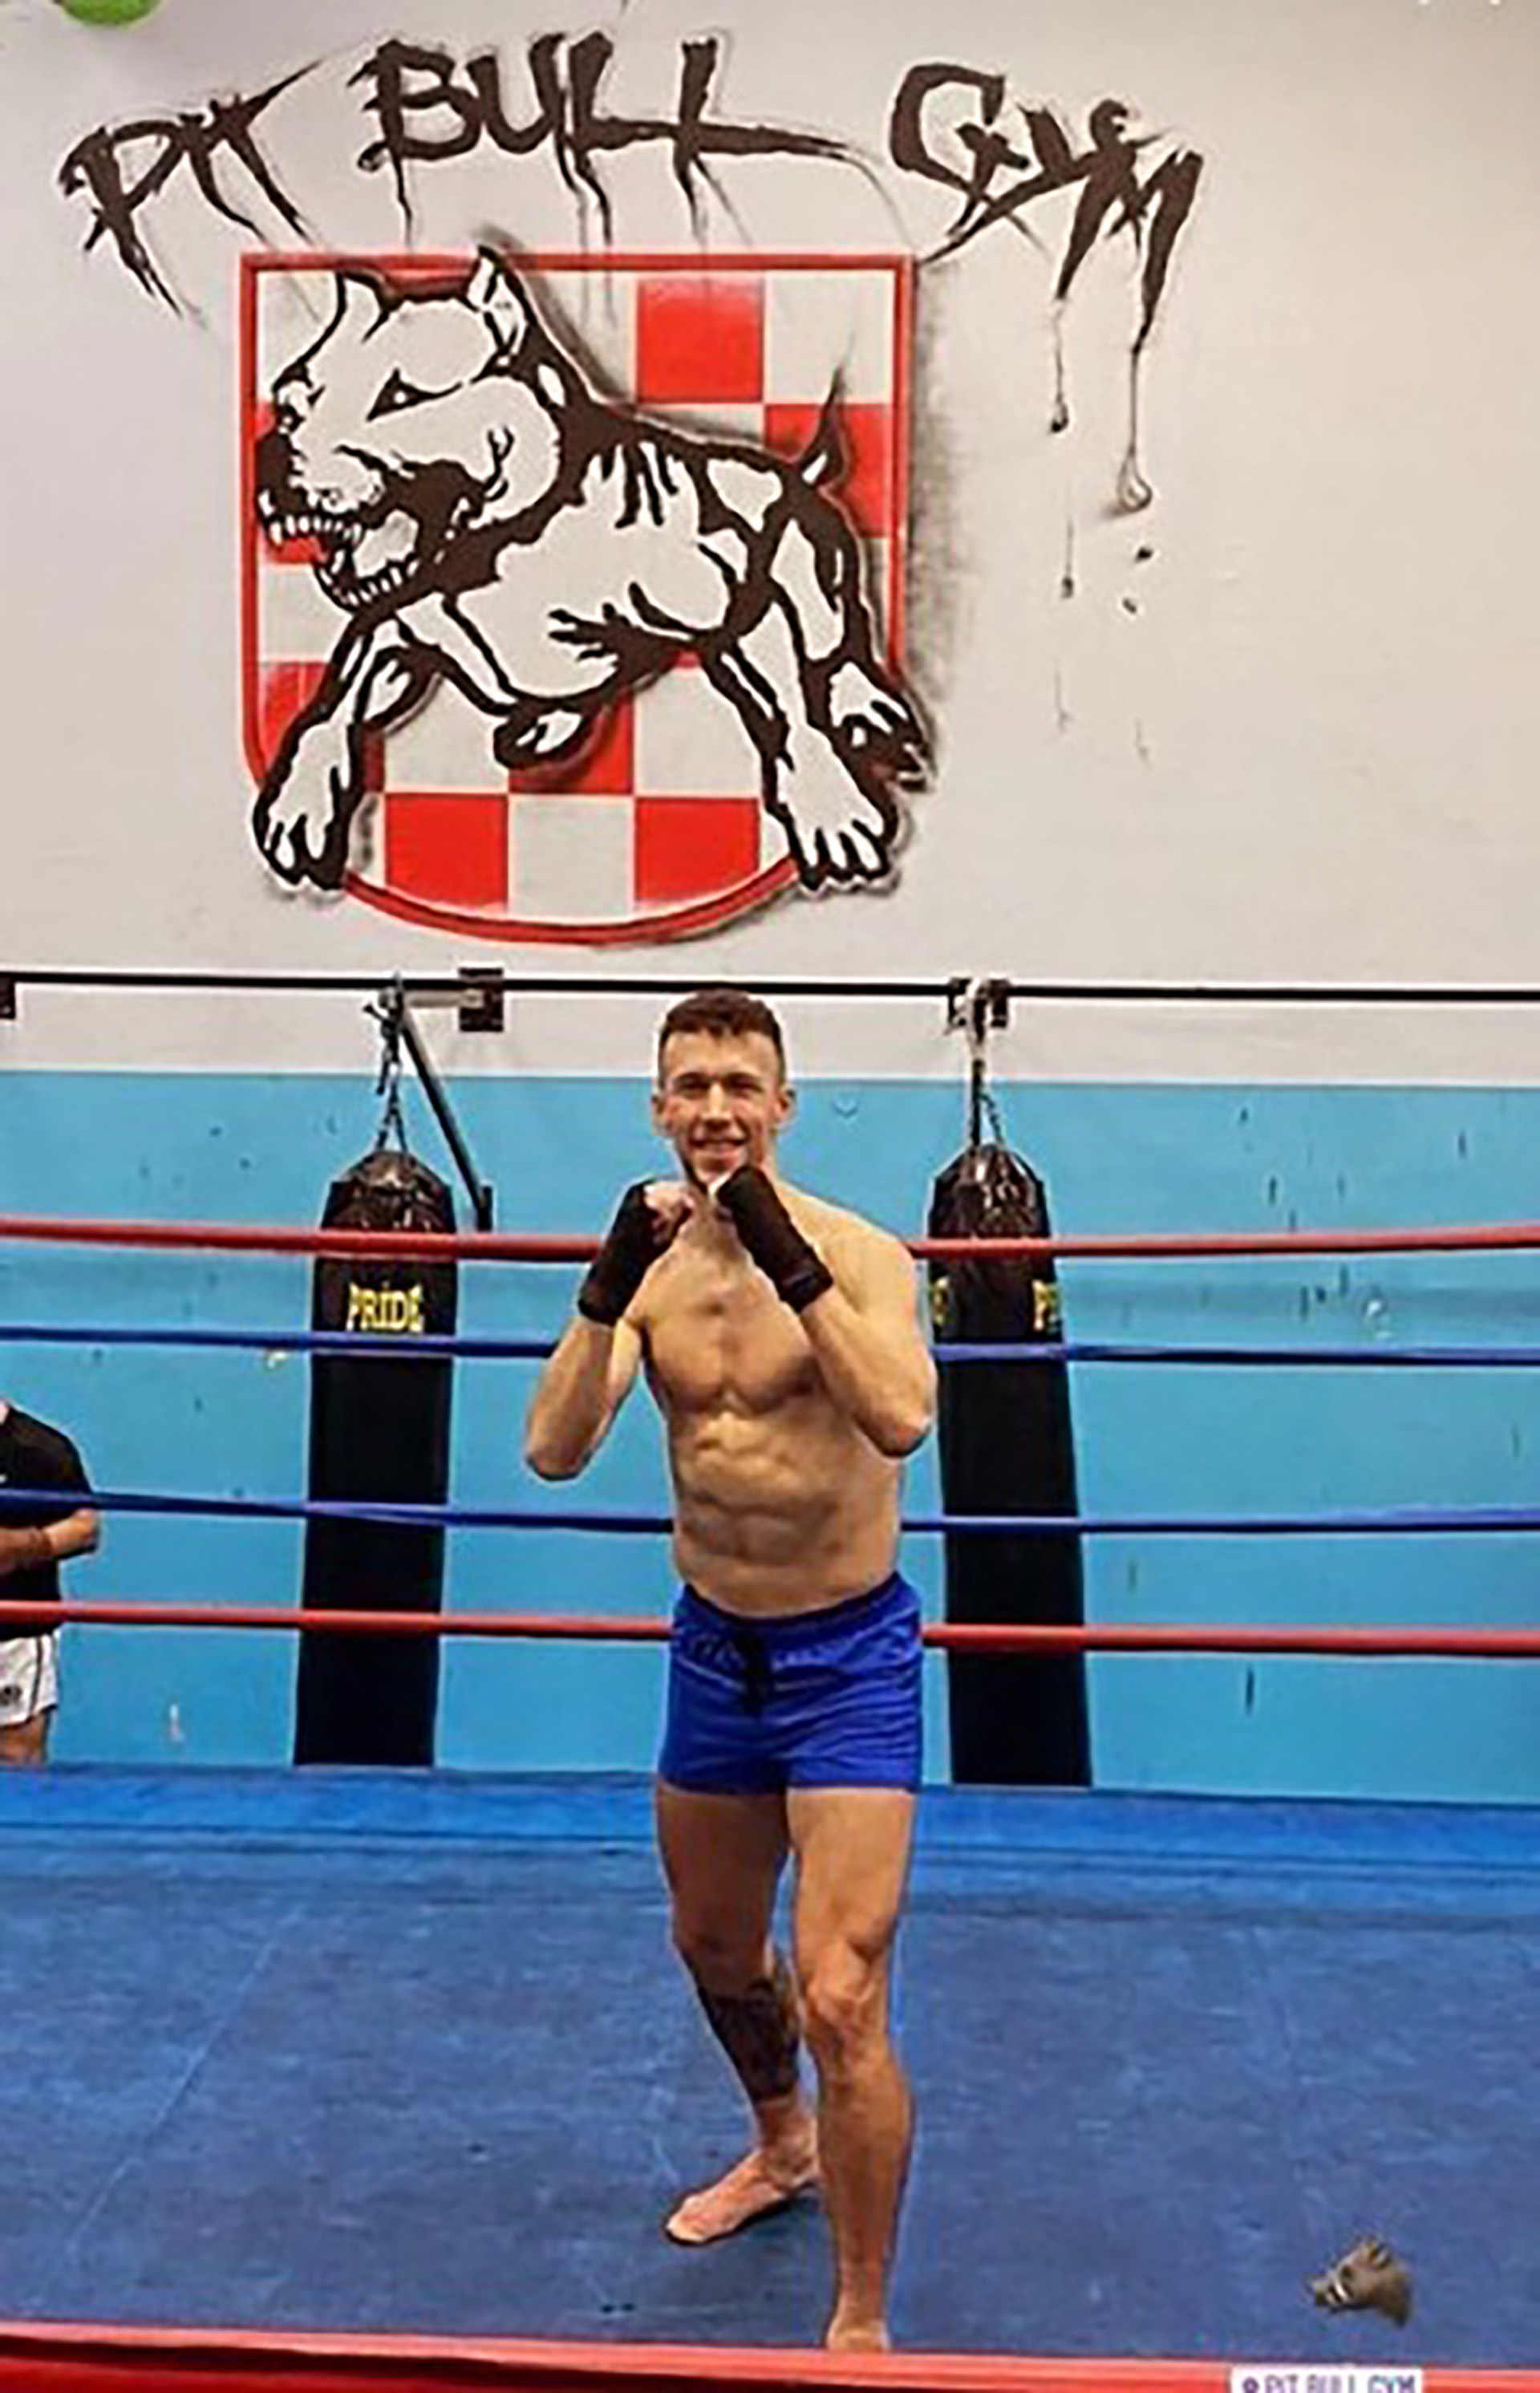 Perisic also practices kick boxing 